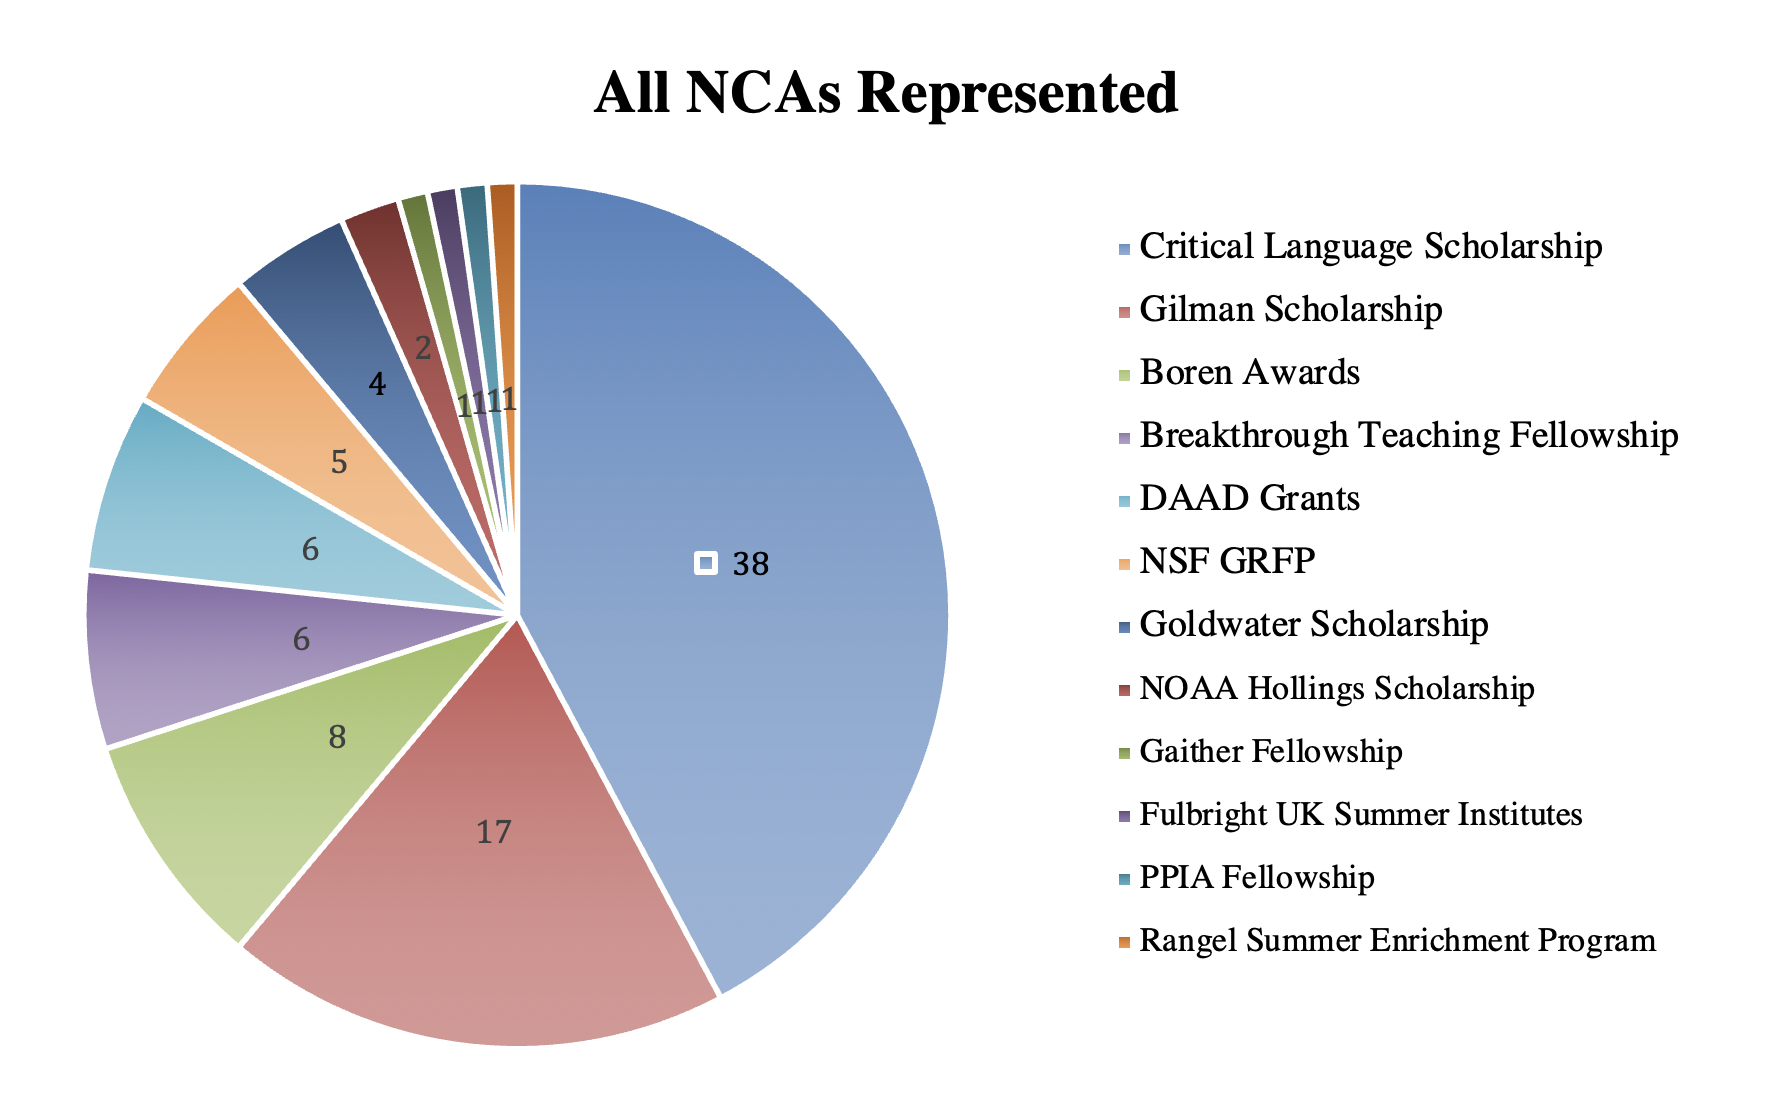 All NCAs represented in the study